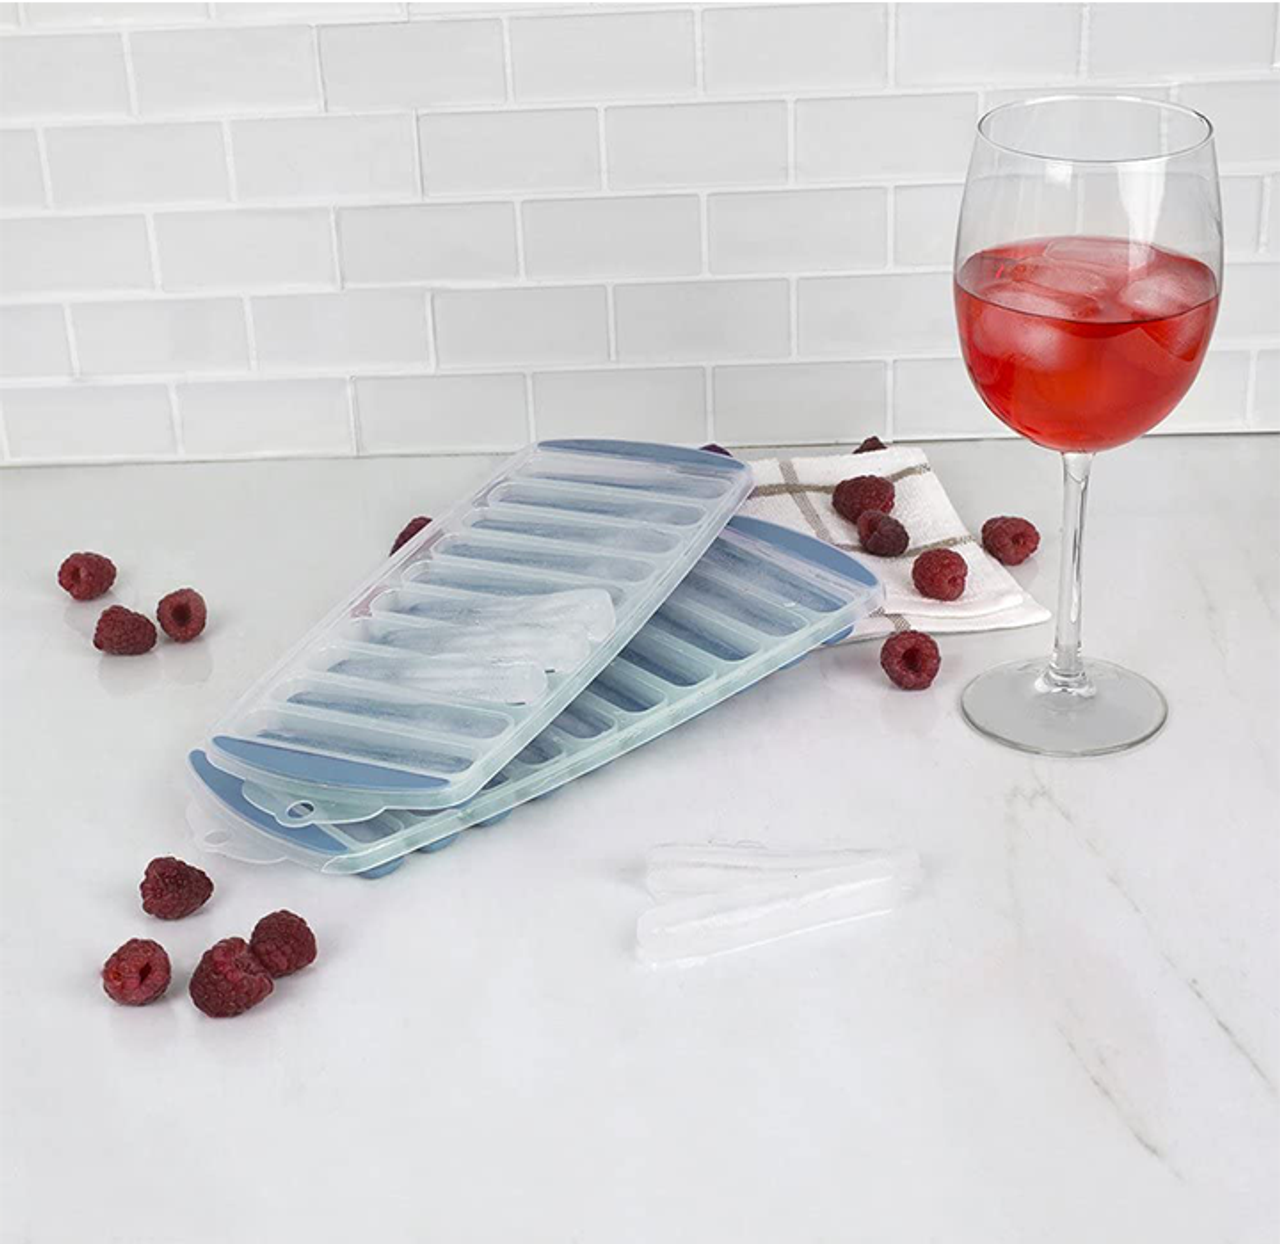 Slim, Silicone Ice Cube Tray with Lid, Extra Large Ice Cubes (2 Tray Pack)